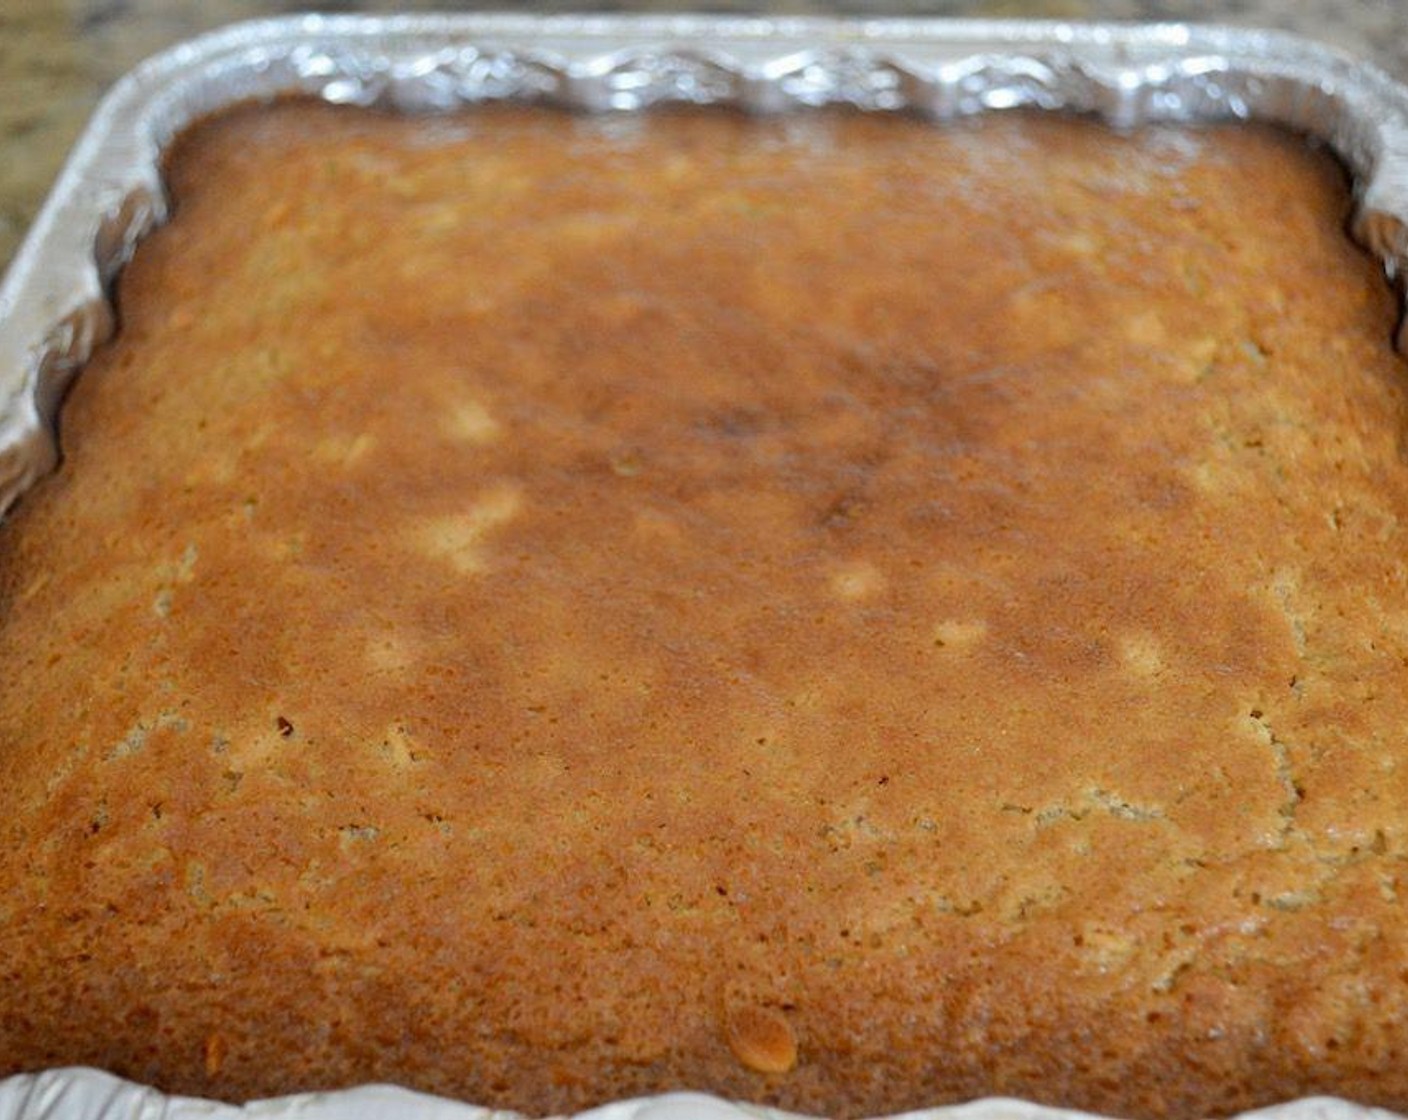 step 8 Pour the batter evenly into the baking dish and bake it for 55-60 minutes, until golden brown on top and a toothpick comes out cleanly.